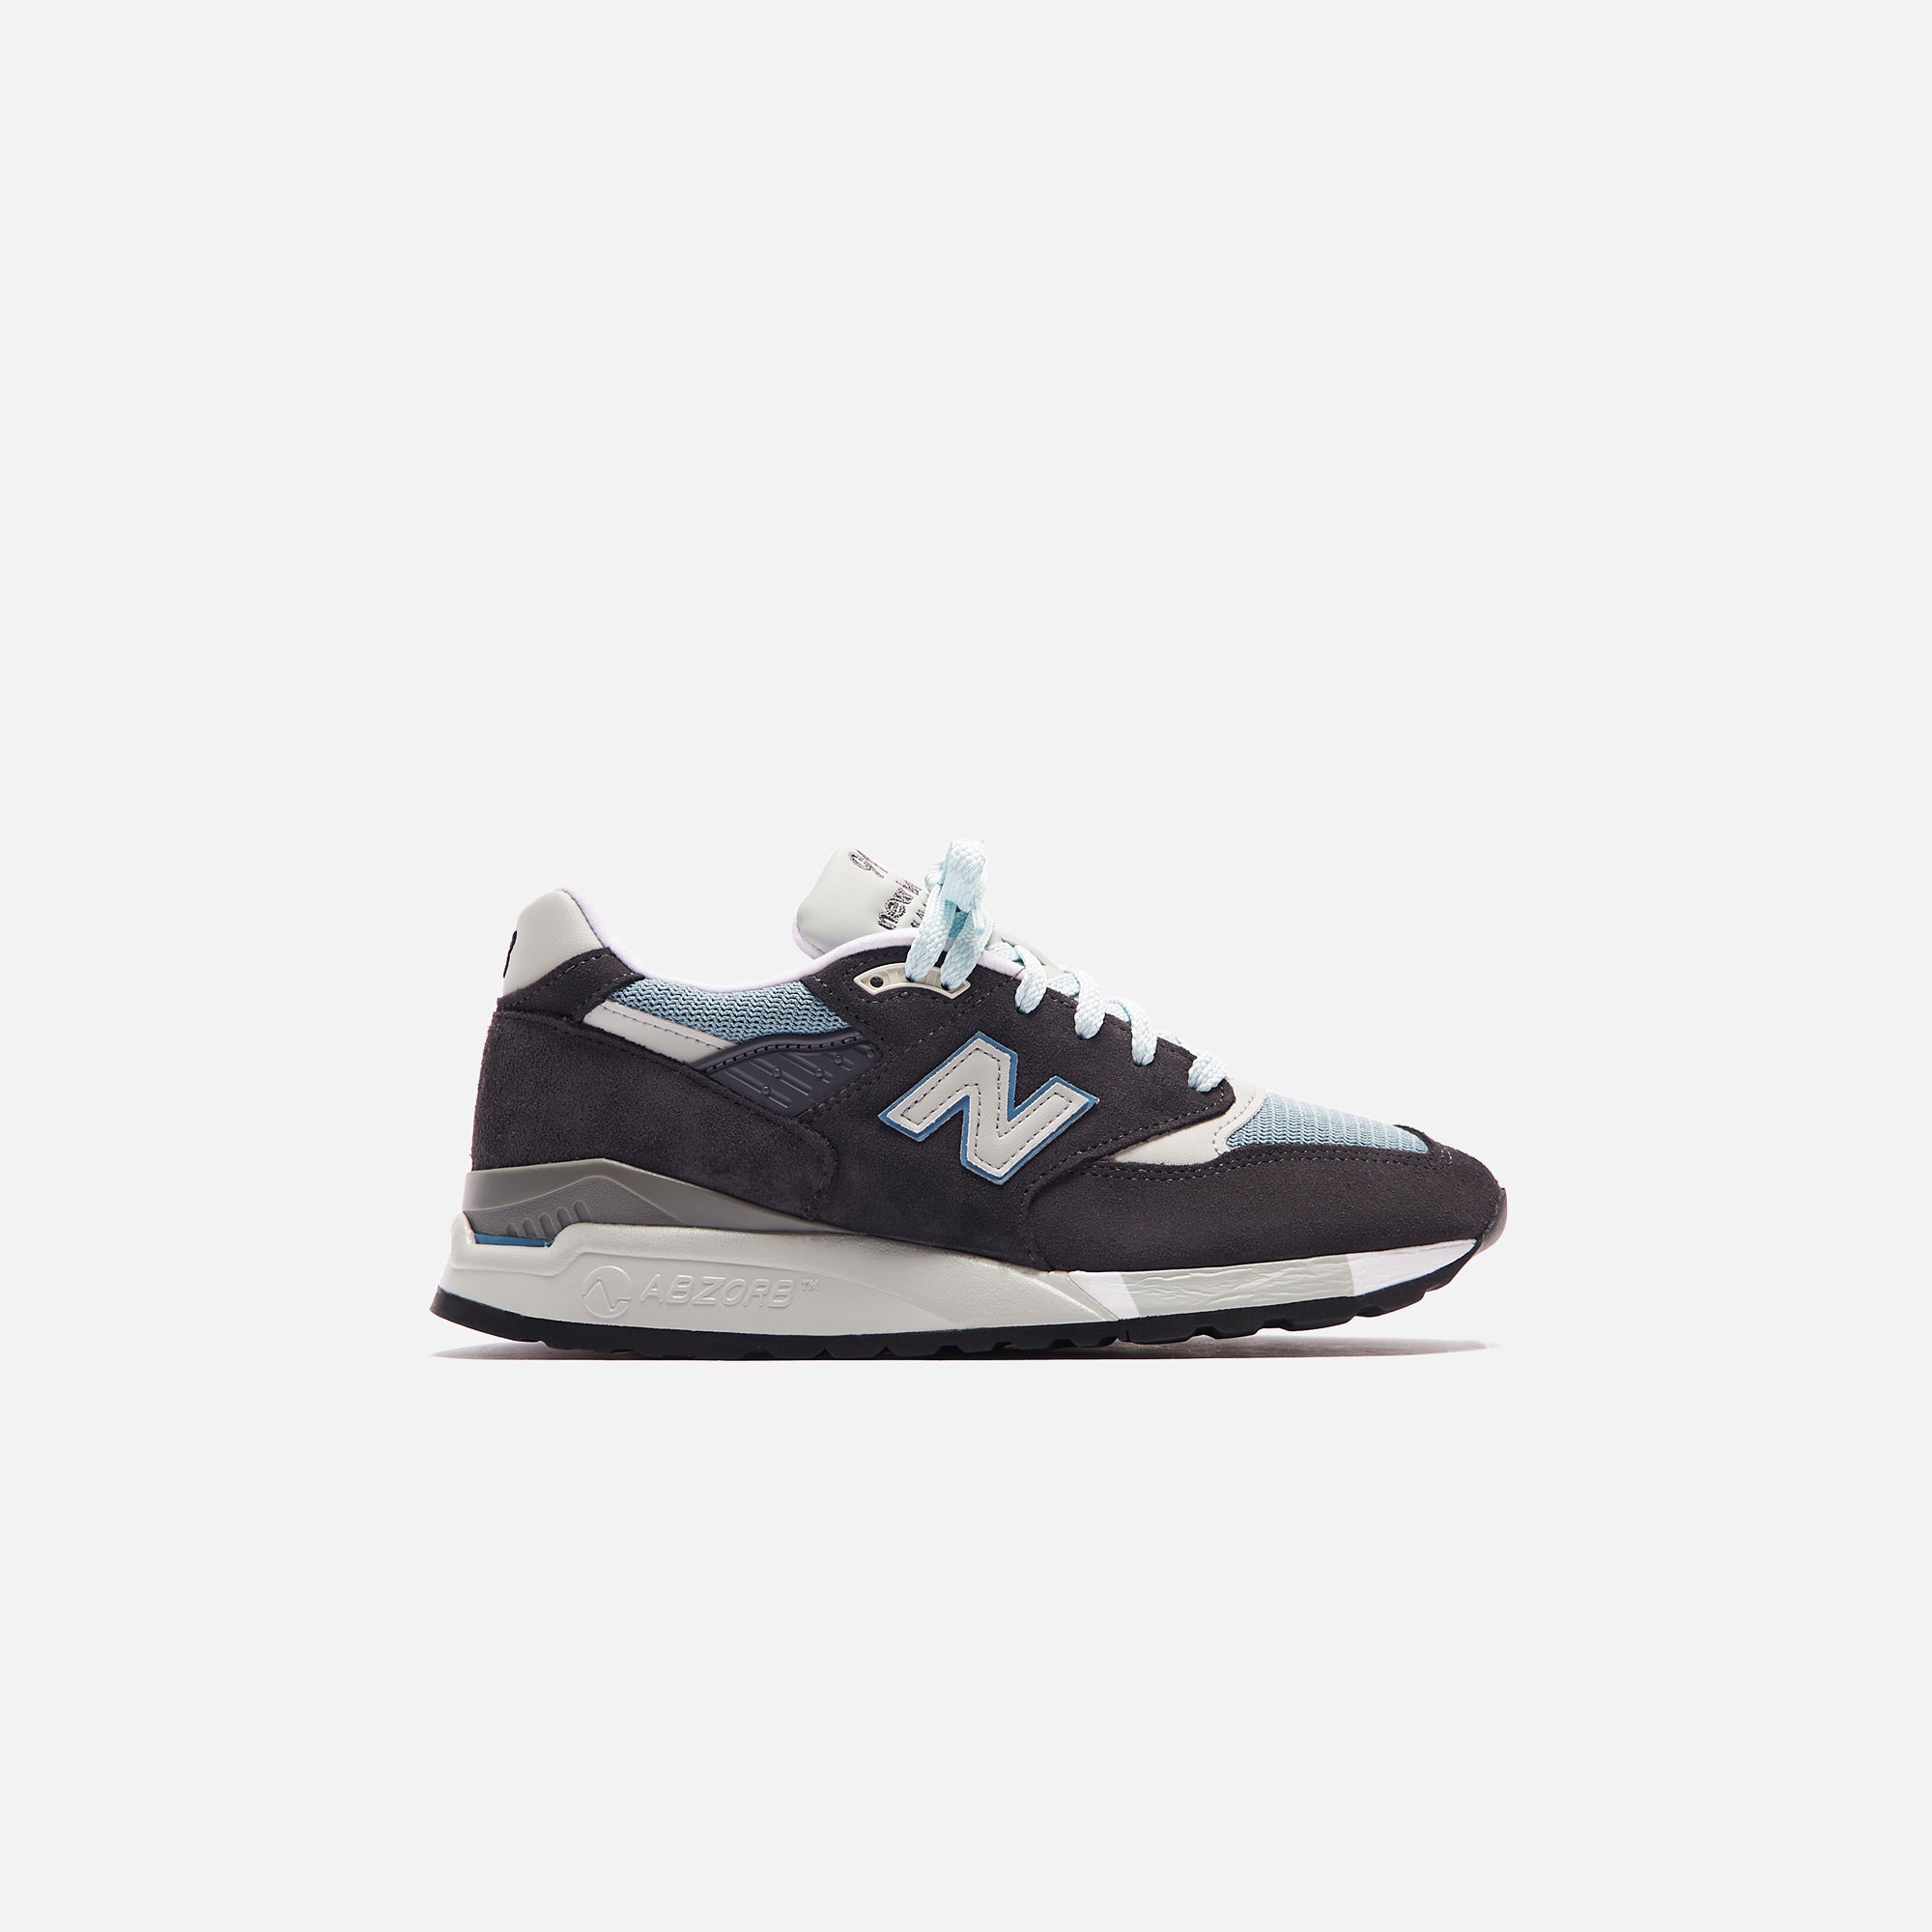 Kith x New Balance for Spring 2